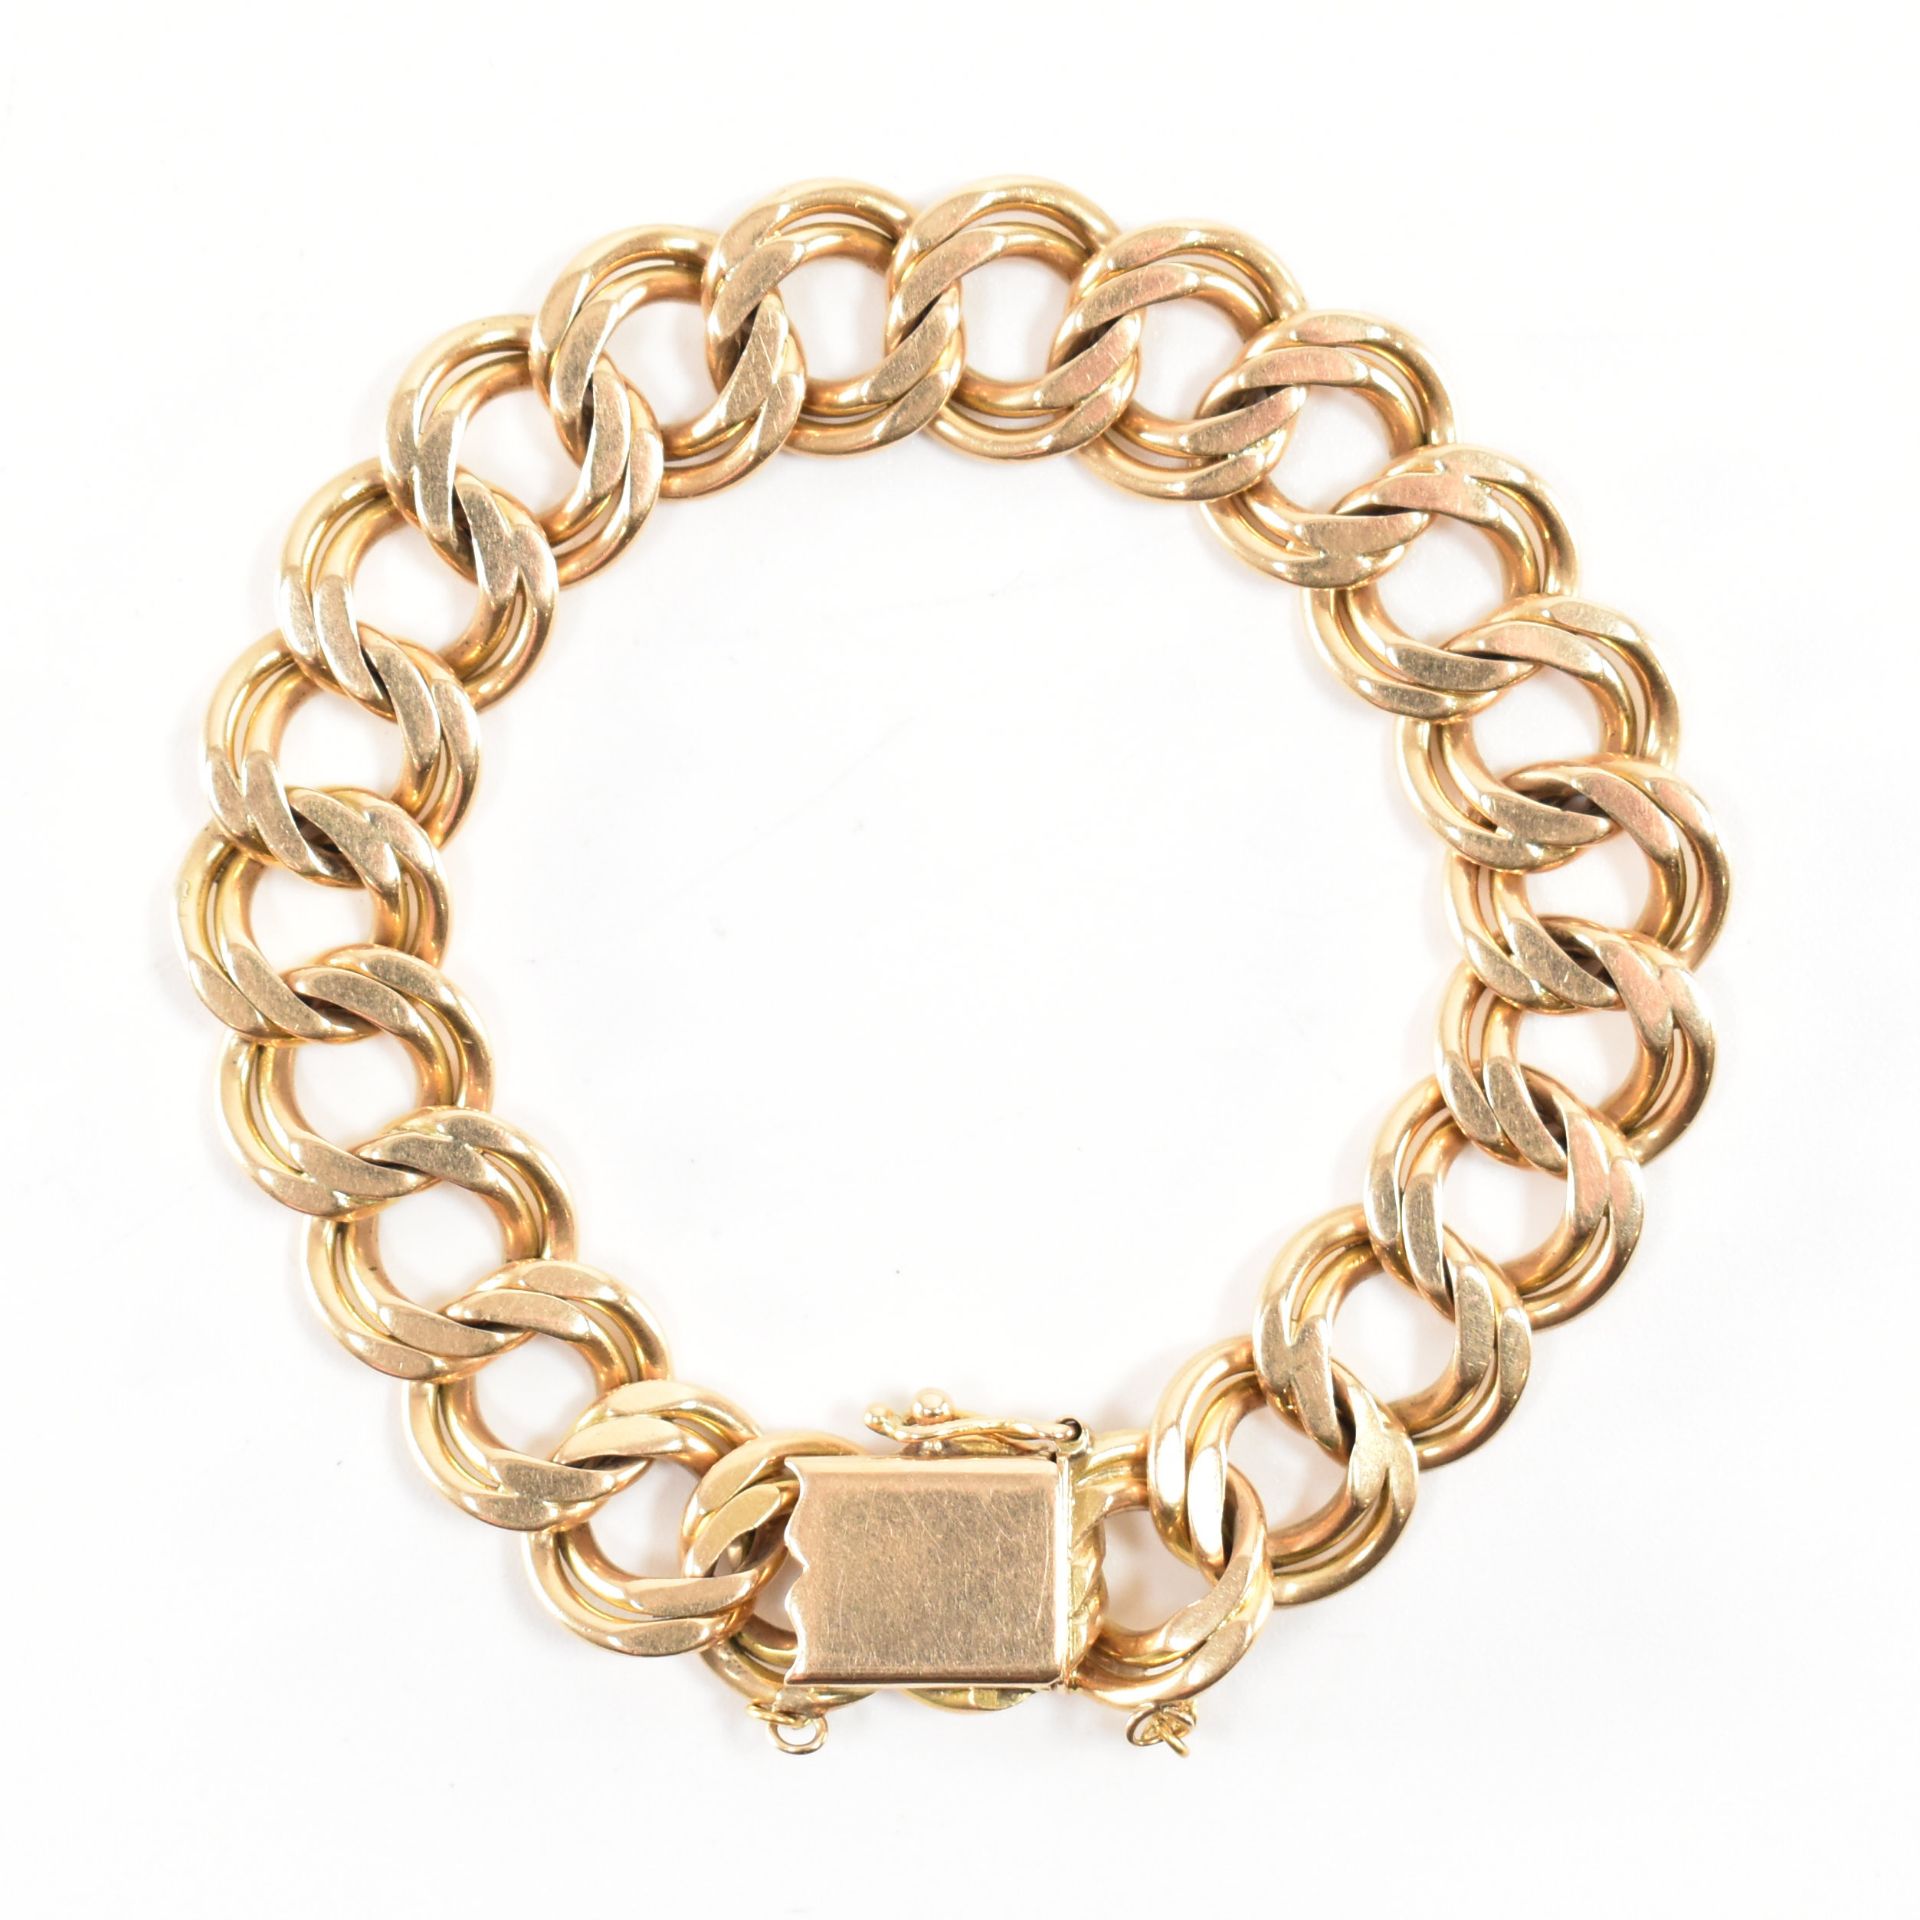 WITHDRAWN - VINTAGE FRENCH 18CT GOLD DOUBLE CURB LINK BRACELET - Image 2 of 4